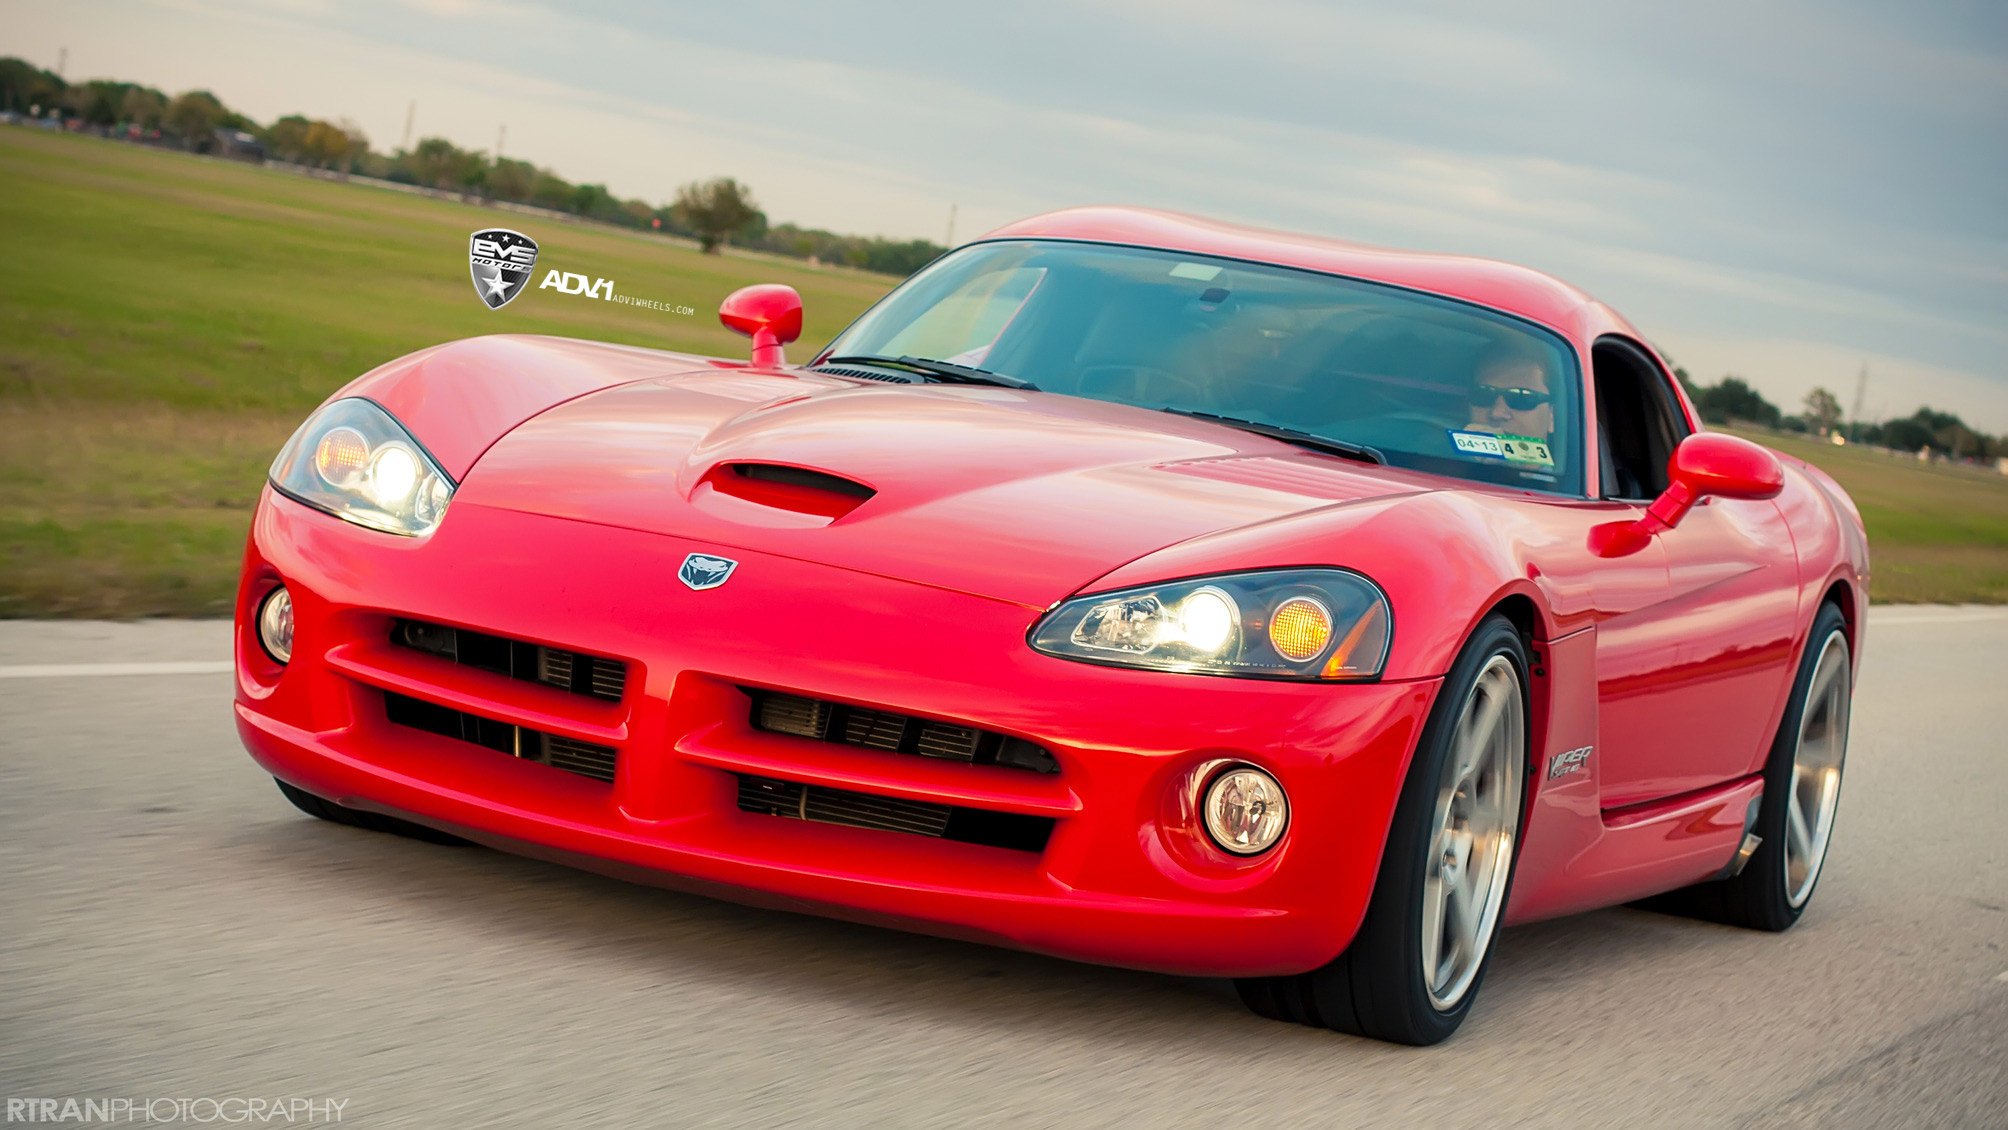 Red Dodge Viper with Custom Vented Hood - Photo by ADV.1